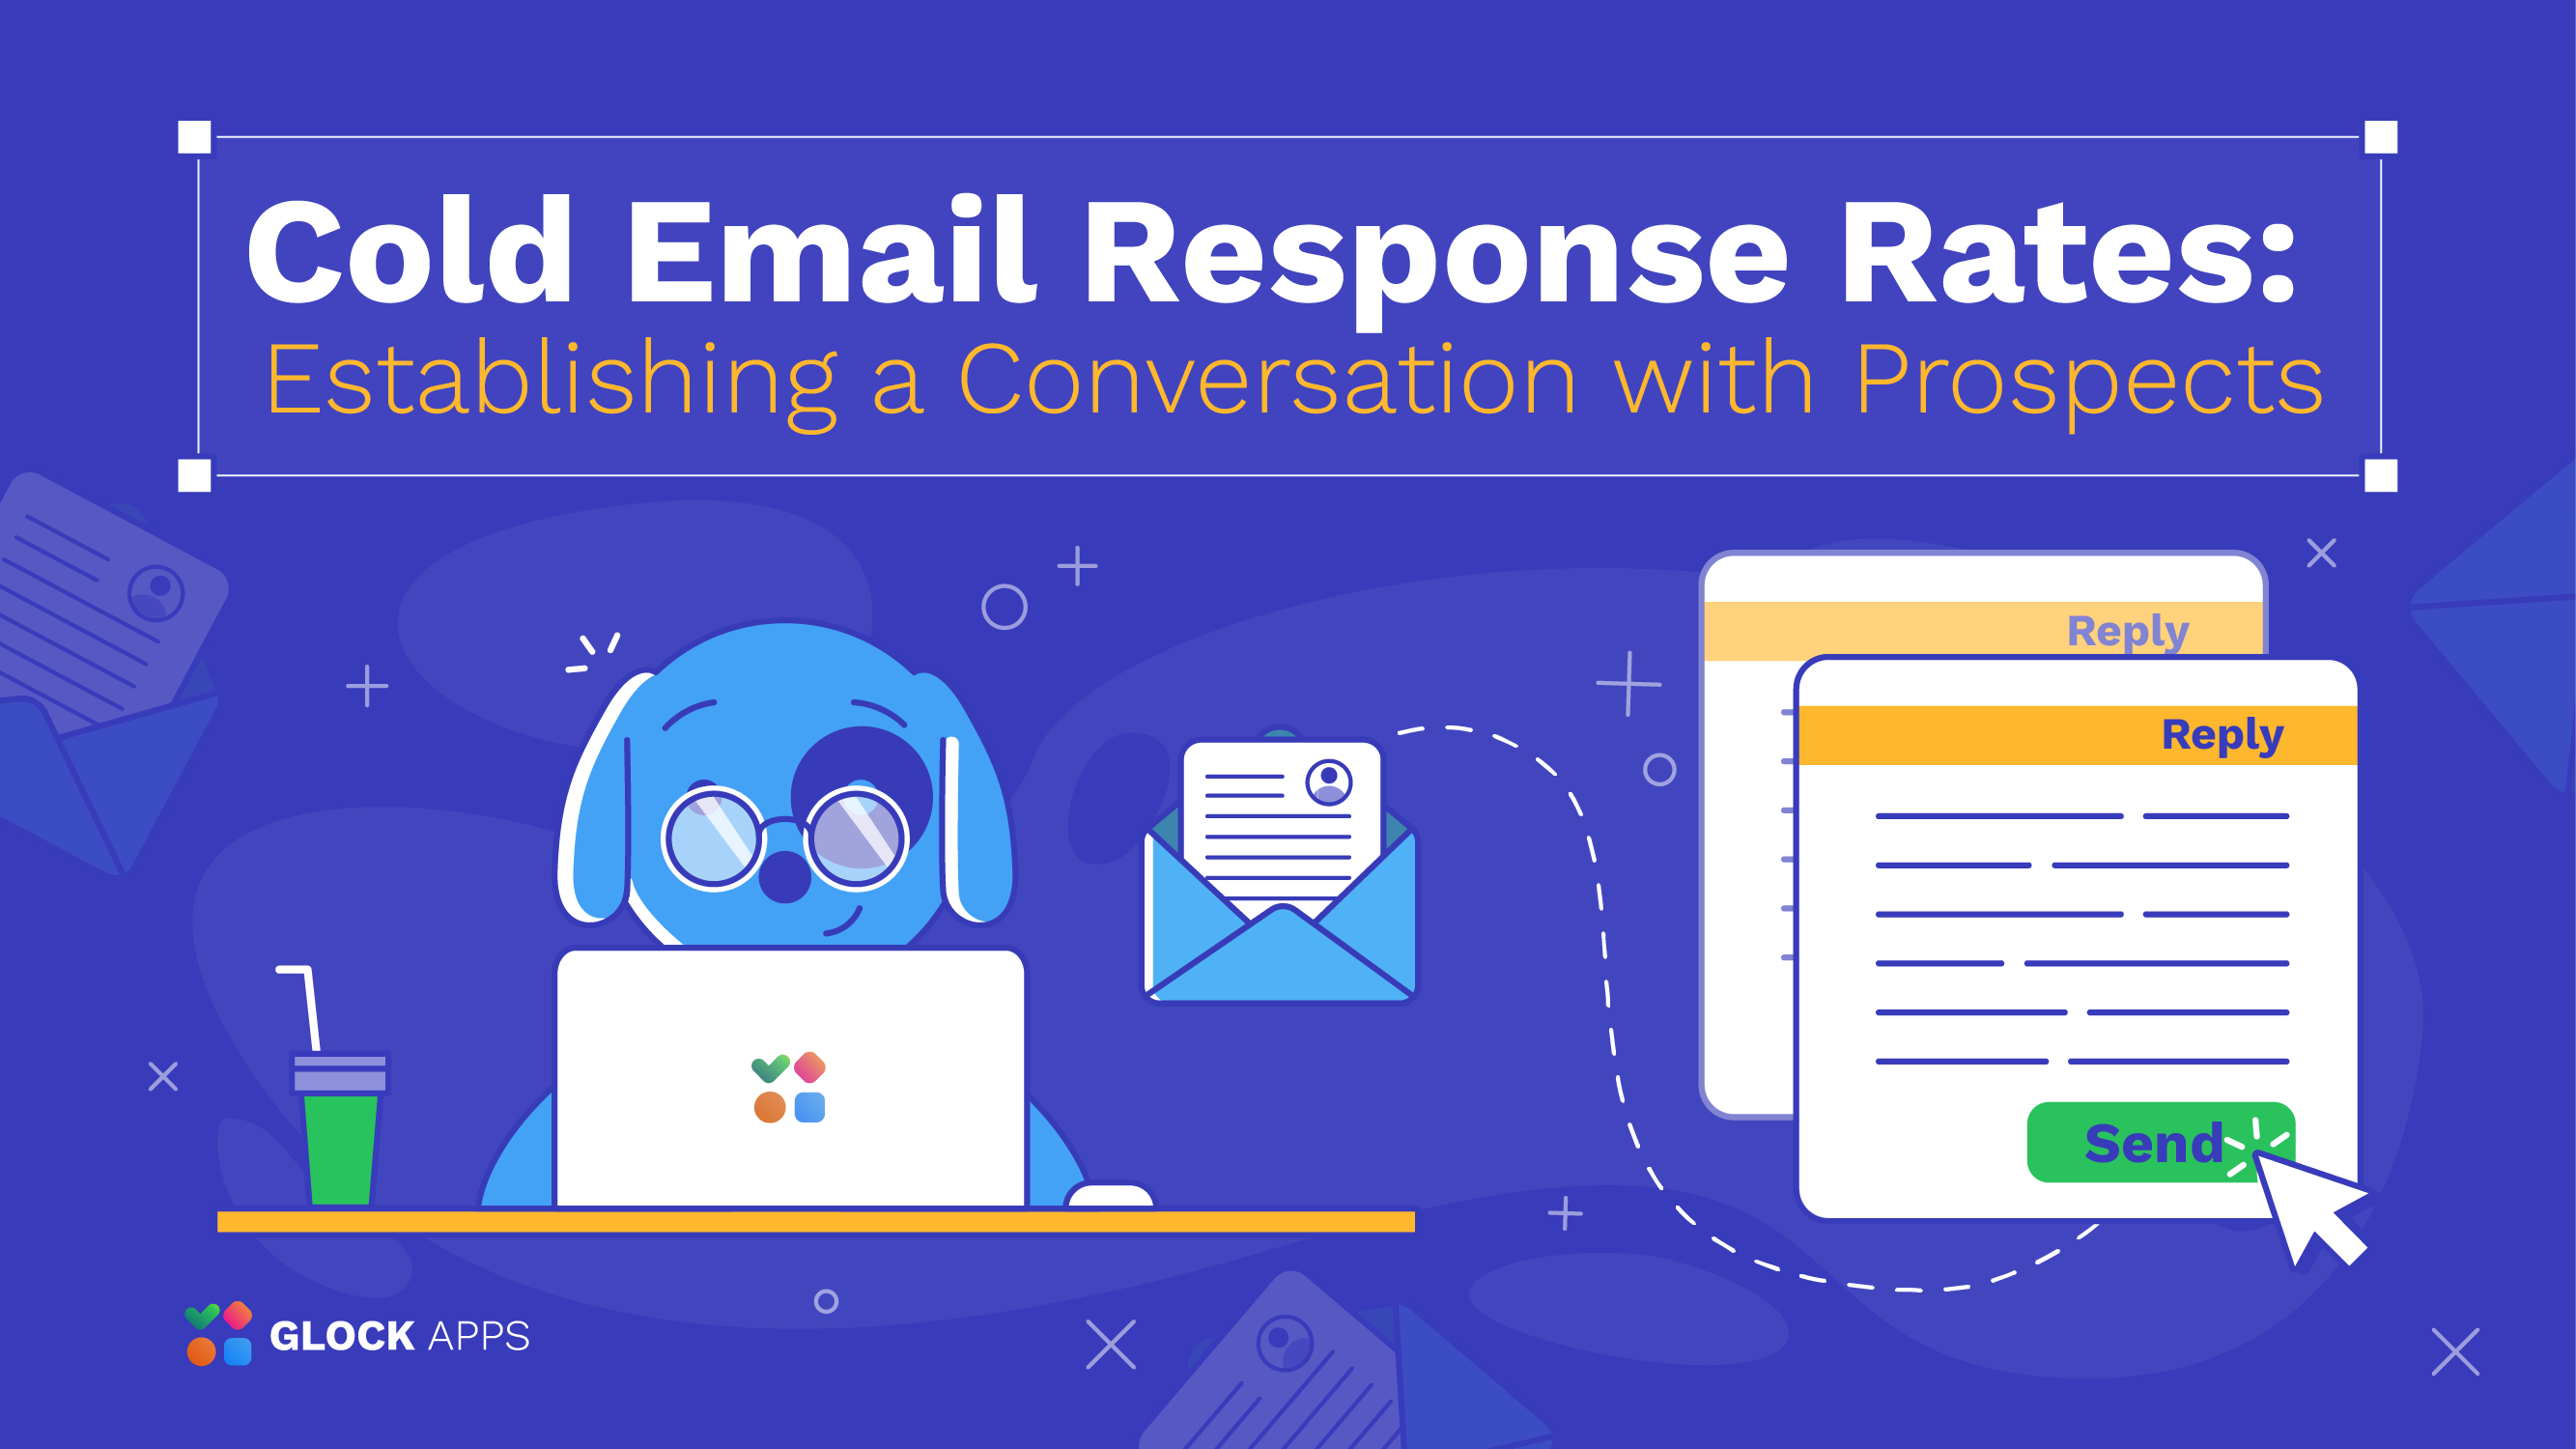 Cold Email Response Rates